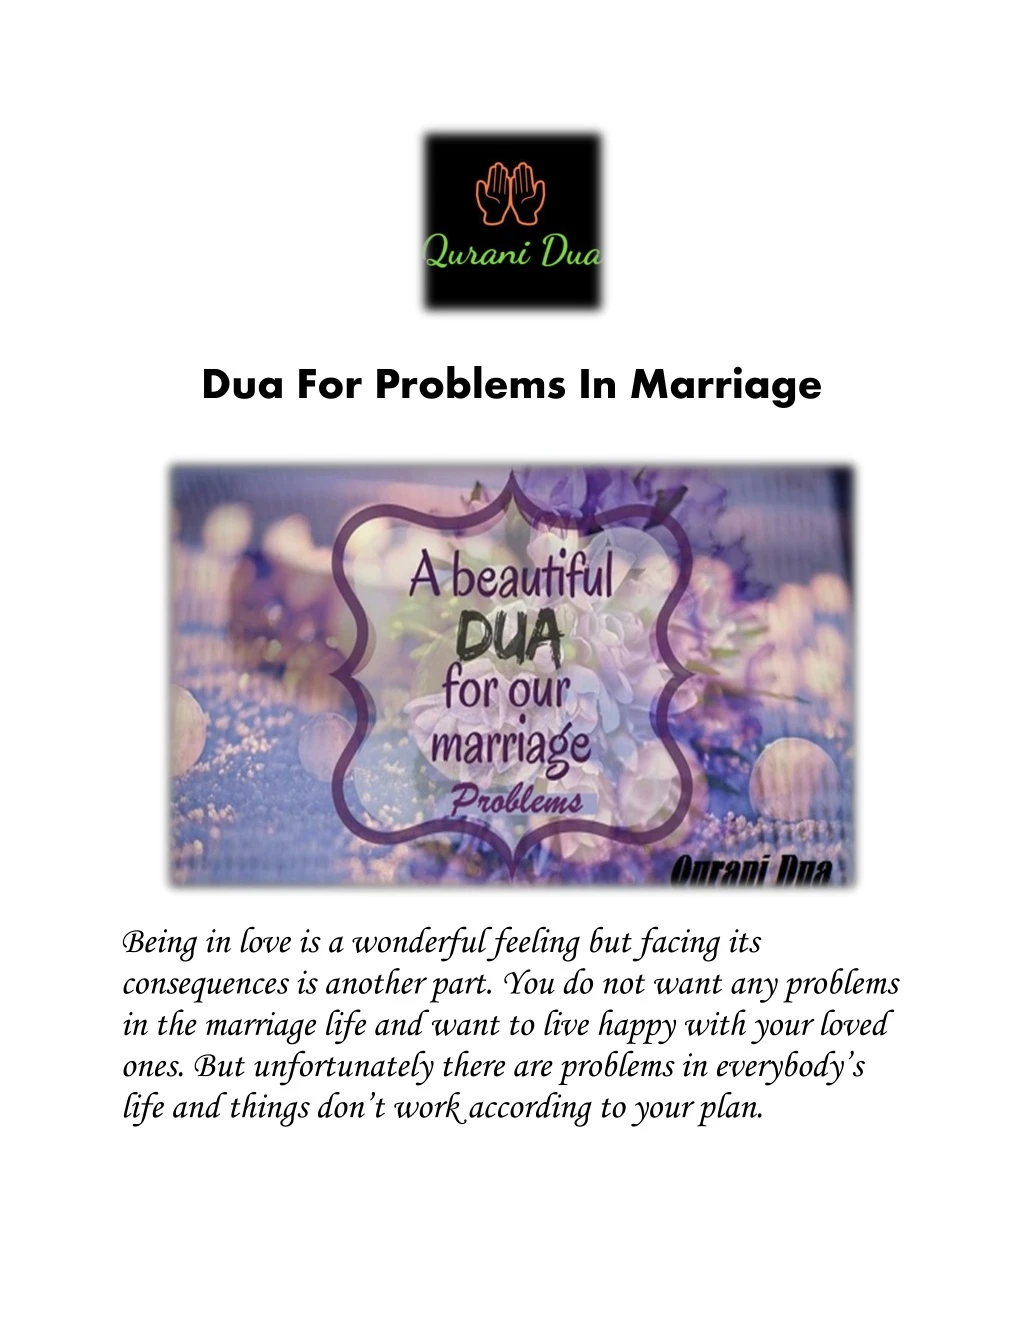 dua for problems in marriage